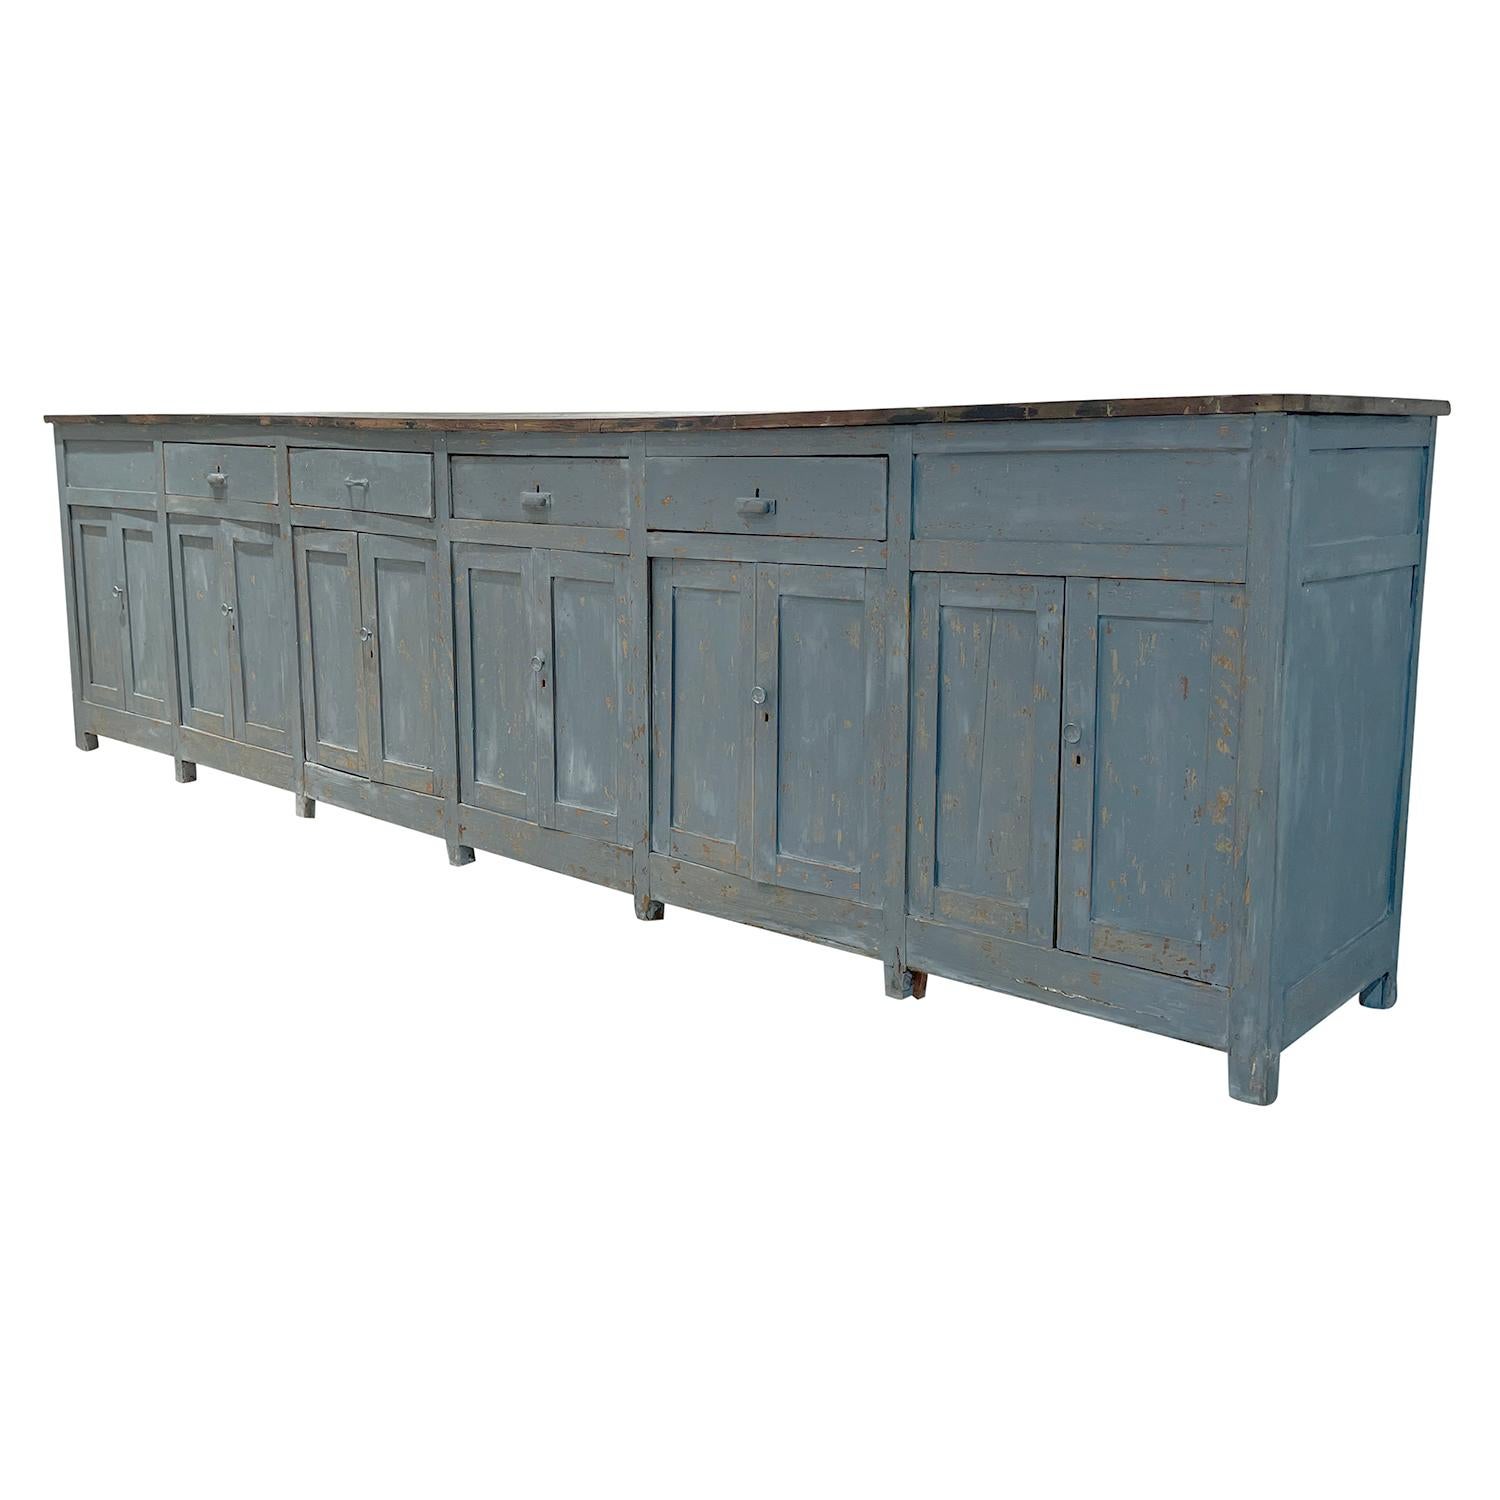 French Provincial 19th Century Grey-Blue French Provencal Pinewood Credenza - Antique Sideboard For Sale